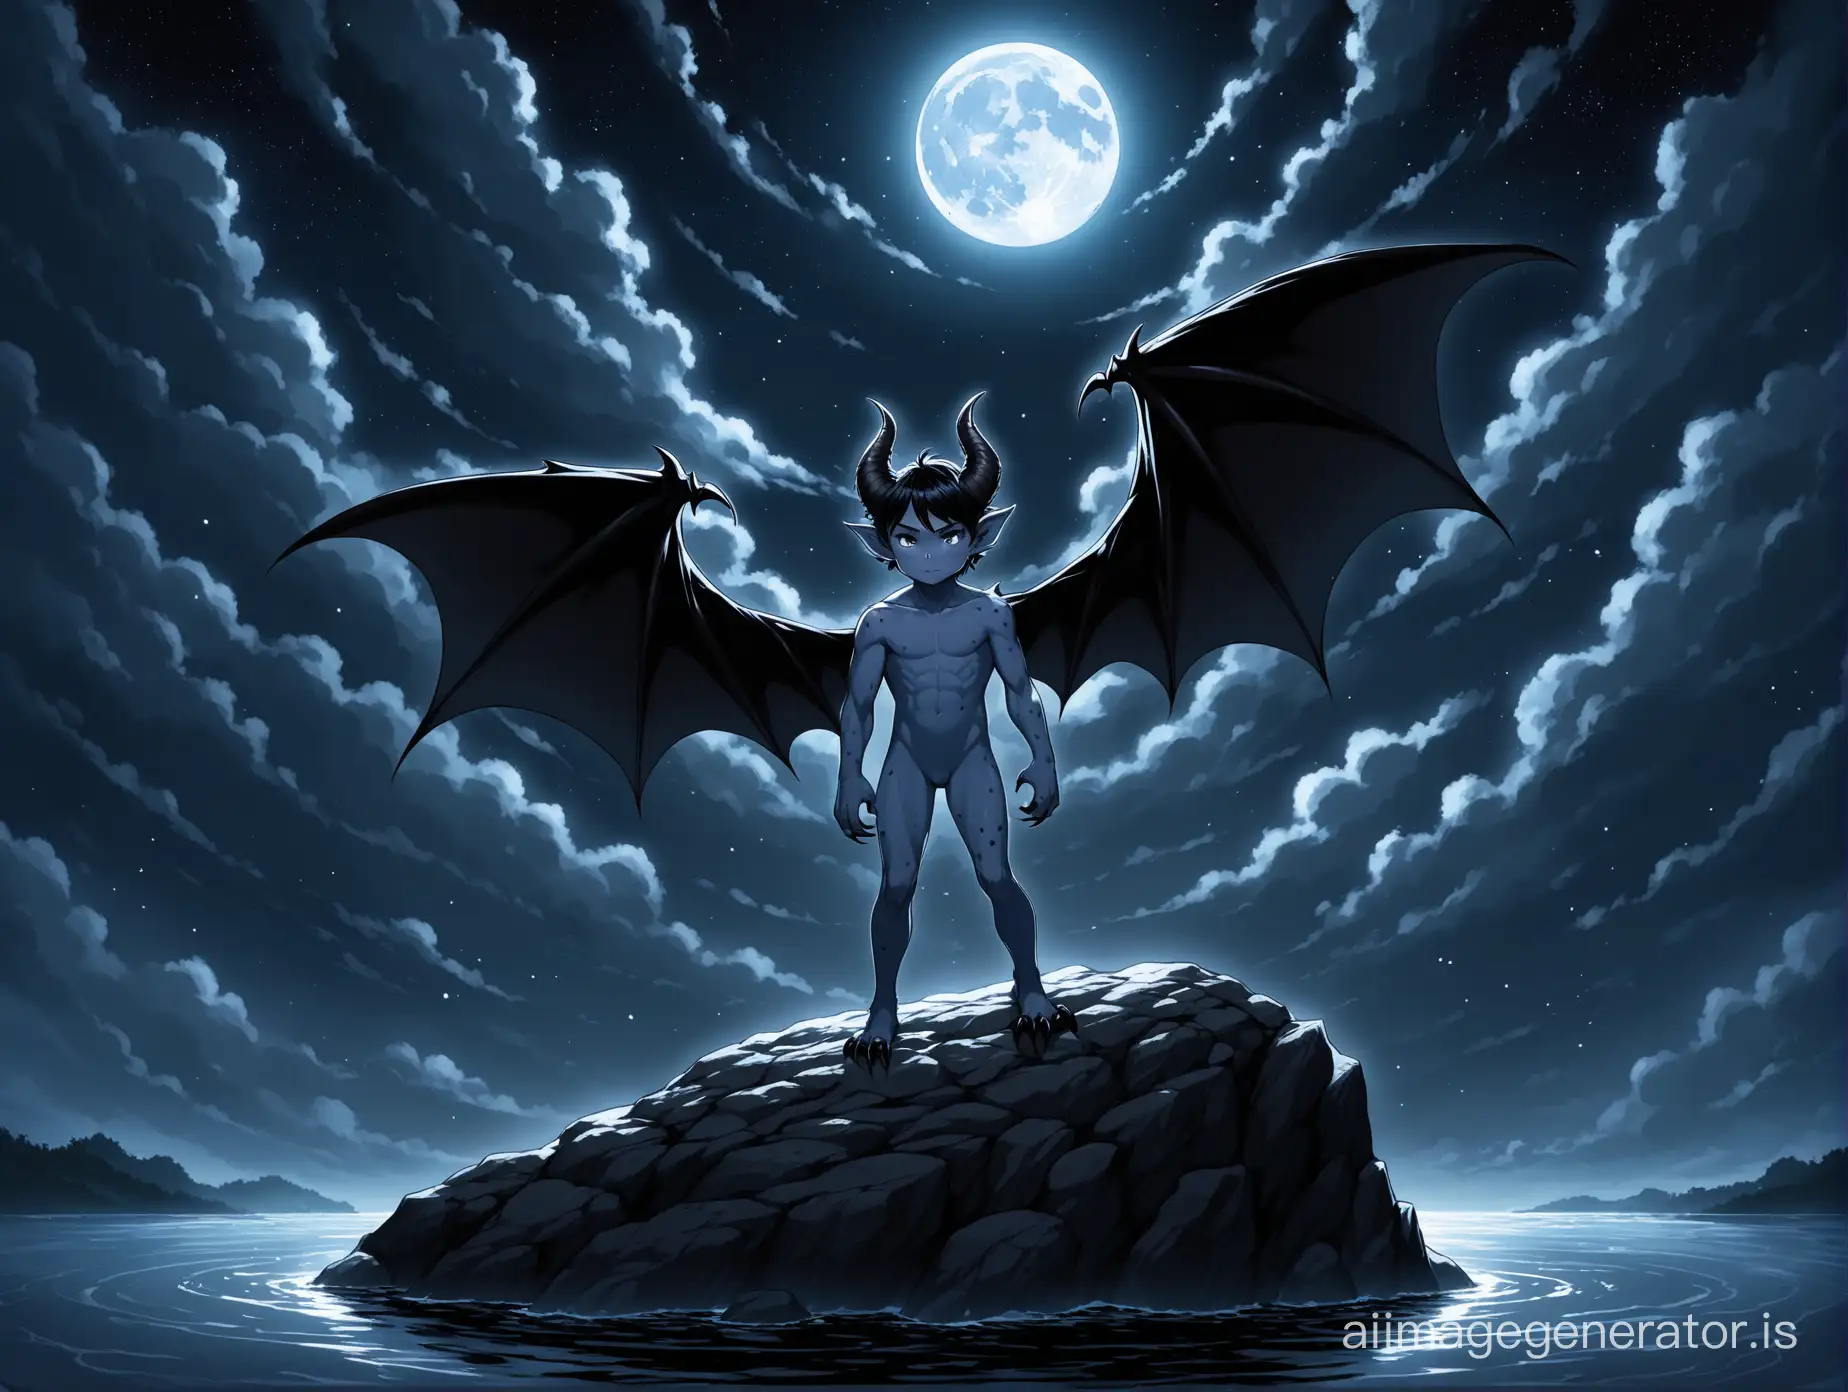 its Night.
We see a nude demon-boy with humanoid proportions, a large tail and very smooth gray-blue skin and some freckles. He has natural bat-like wings and a Tail. He has pointet ears. He has dark hair. He has claws instead of fingers and toes. He has animal-like feets. Two natural small horns without any struckture growing from the boys forehead. He stands on a Rock in a dark cloudy Night. Show the entire boy in a long shot.  He stands on a Rock in a dark cloudy Night. Show the entire boy in a long shot. 